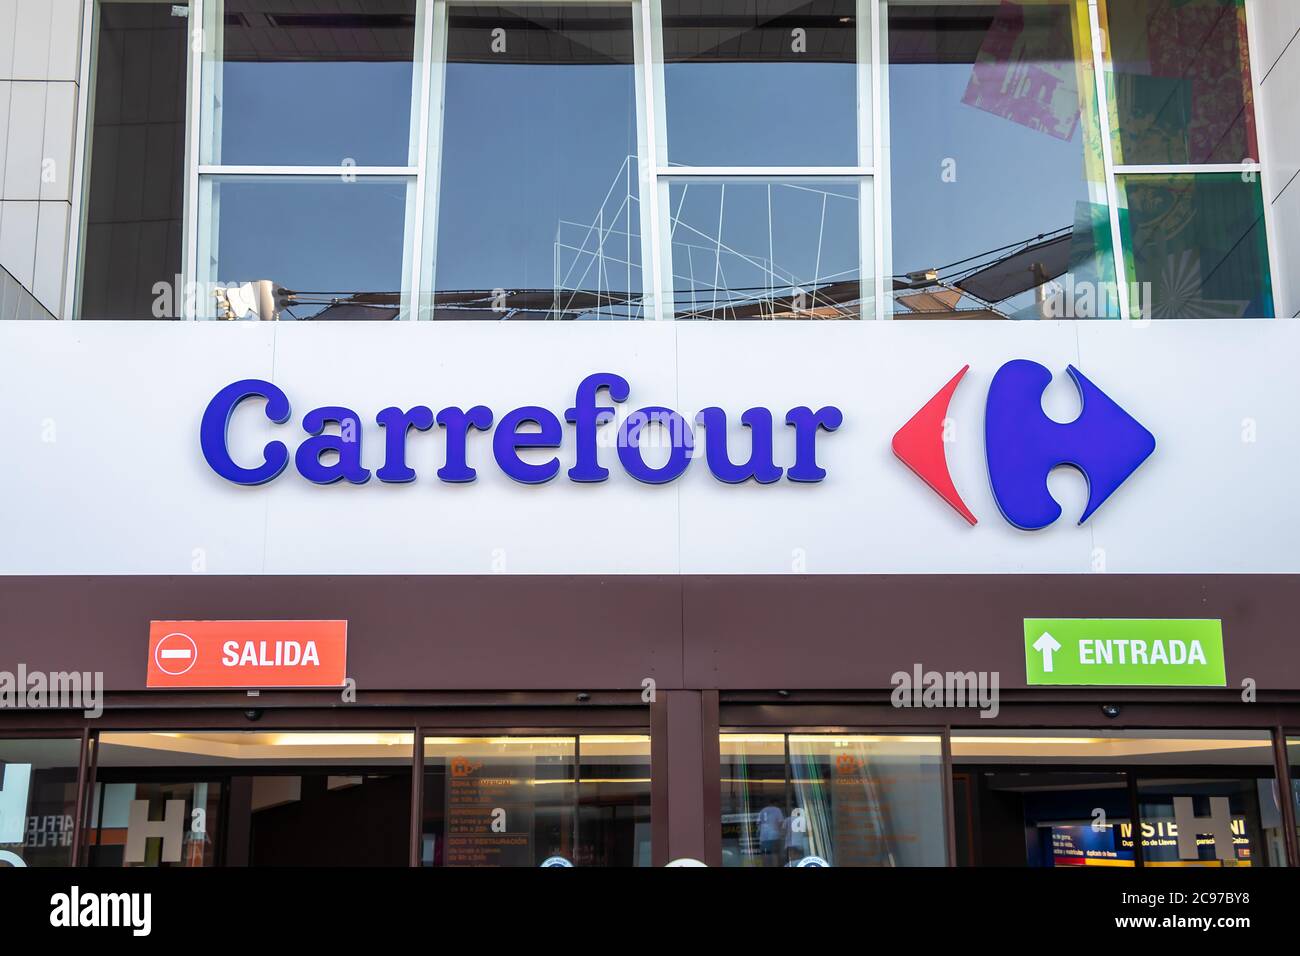 Huelva, Spain - July 27, 2020: Carrefour logo above the store entrance in Holea Shopping center. Carrefour S.A. is a French multinational corporation Stock Photo